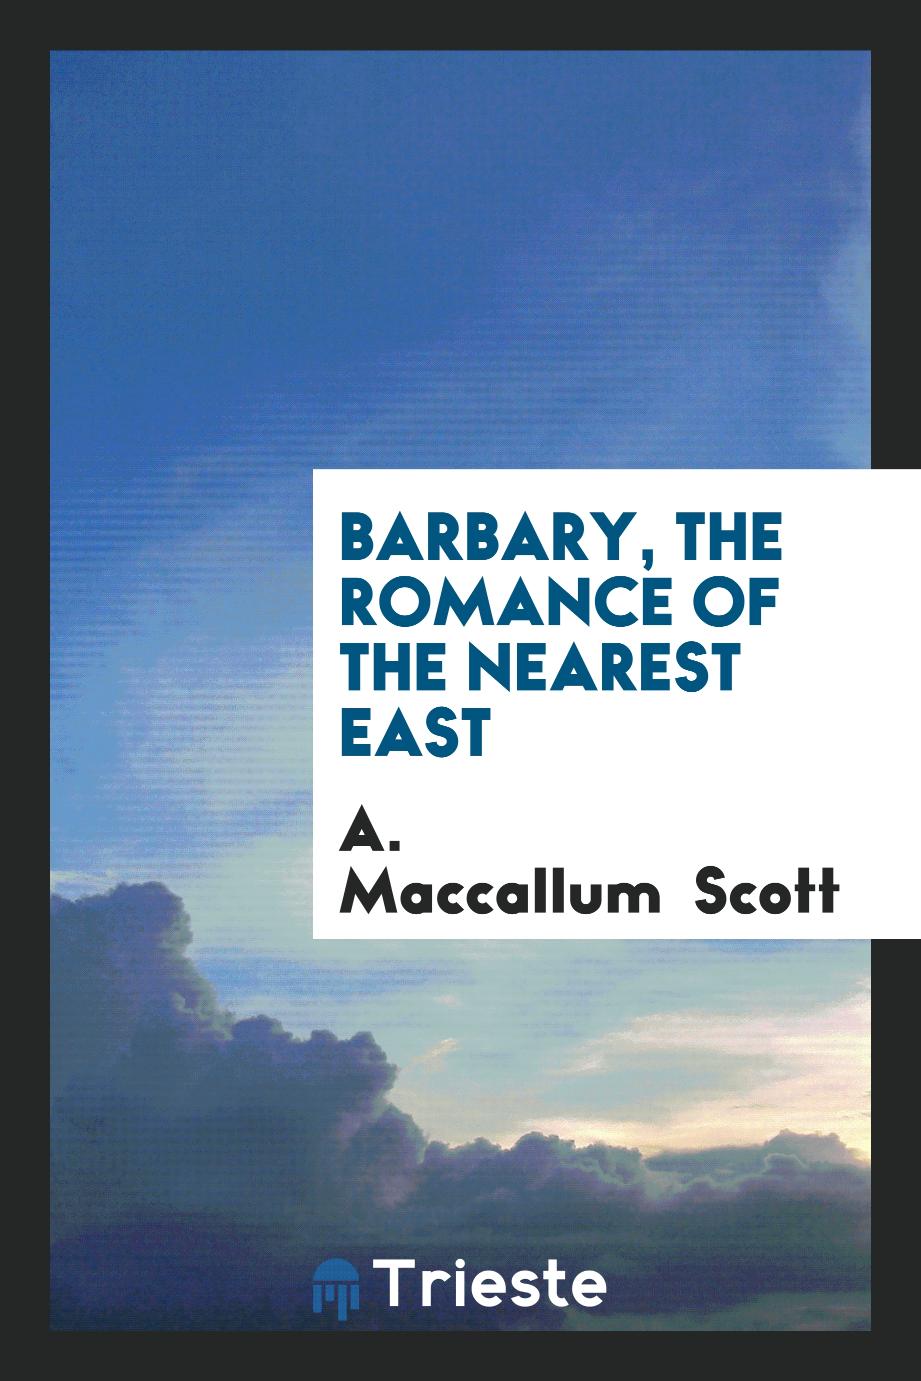 Barbary, the Romance of the Nearest East